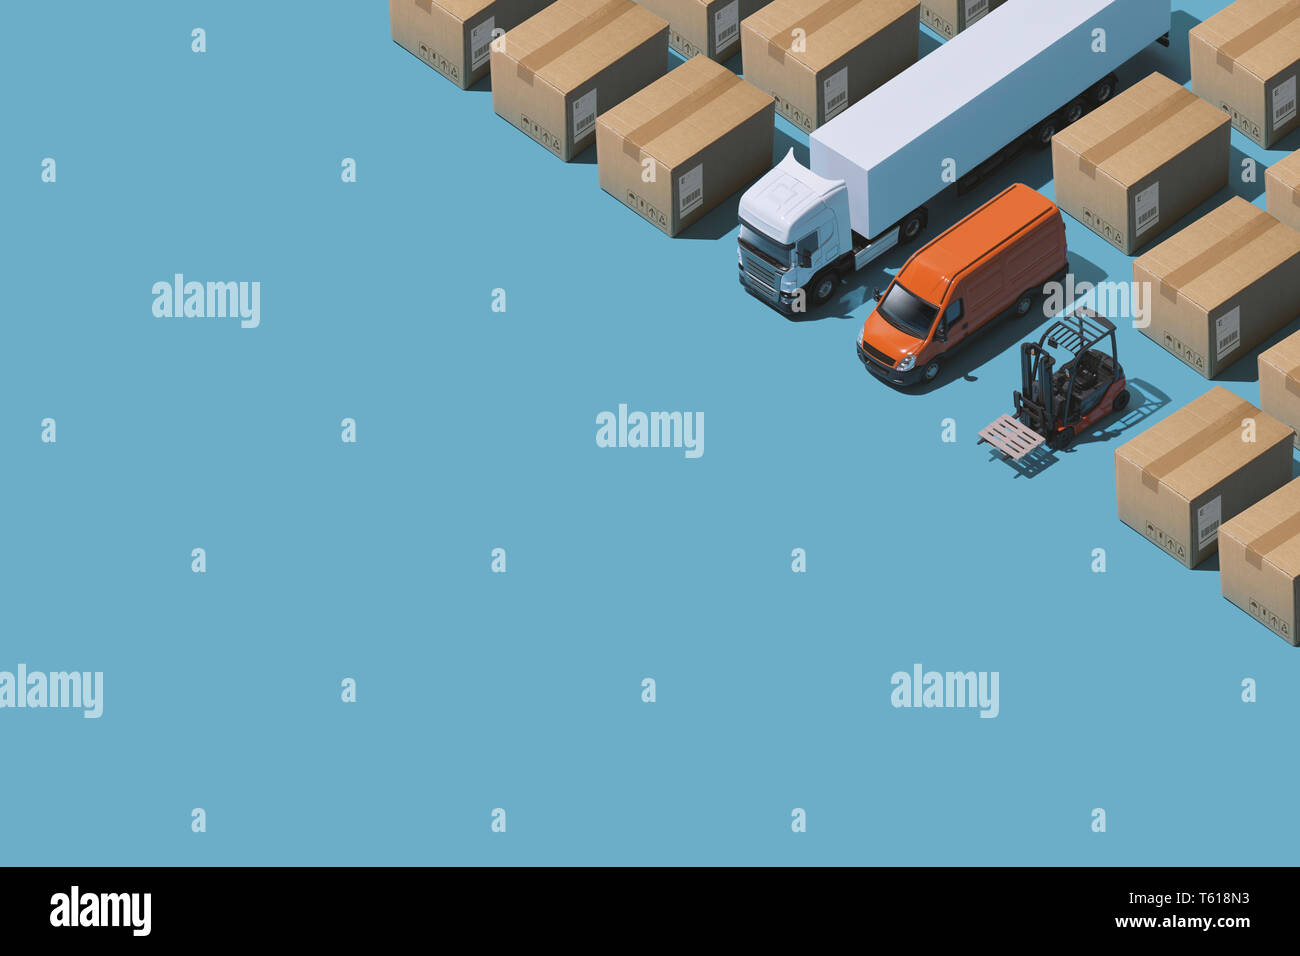 Professional express delivery, warehousing and shipment service: isometric trucks and parcels with copy space Stock Photo